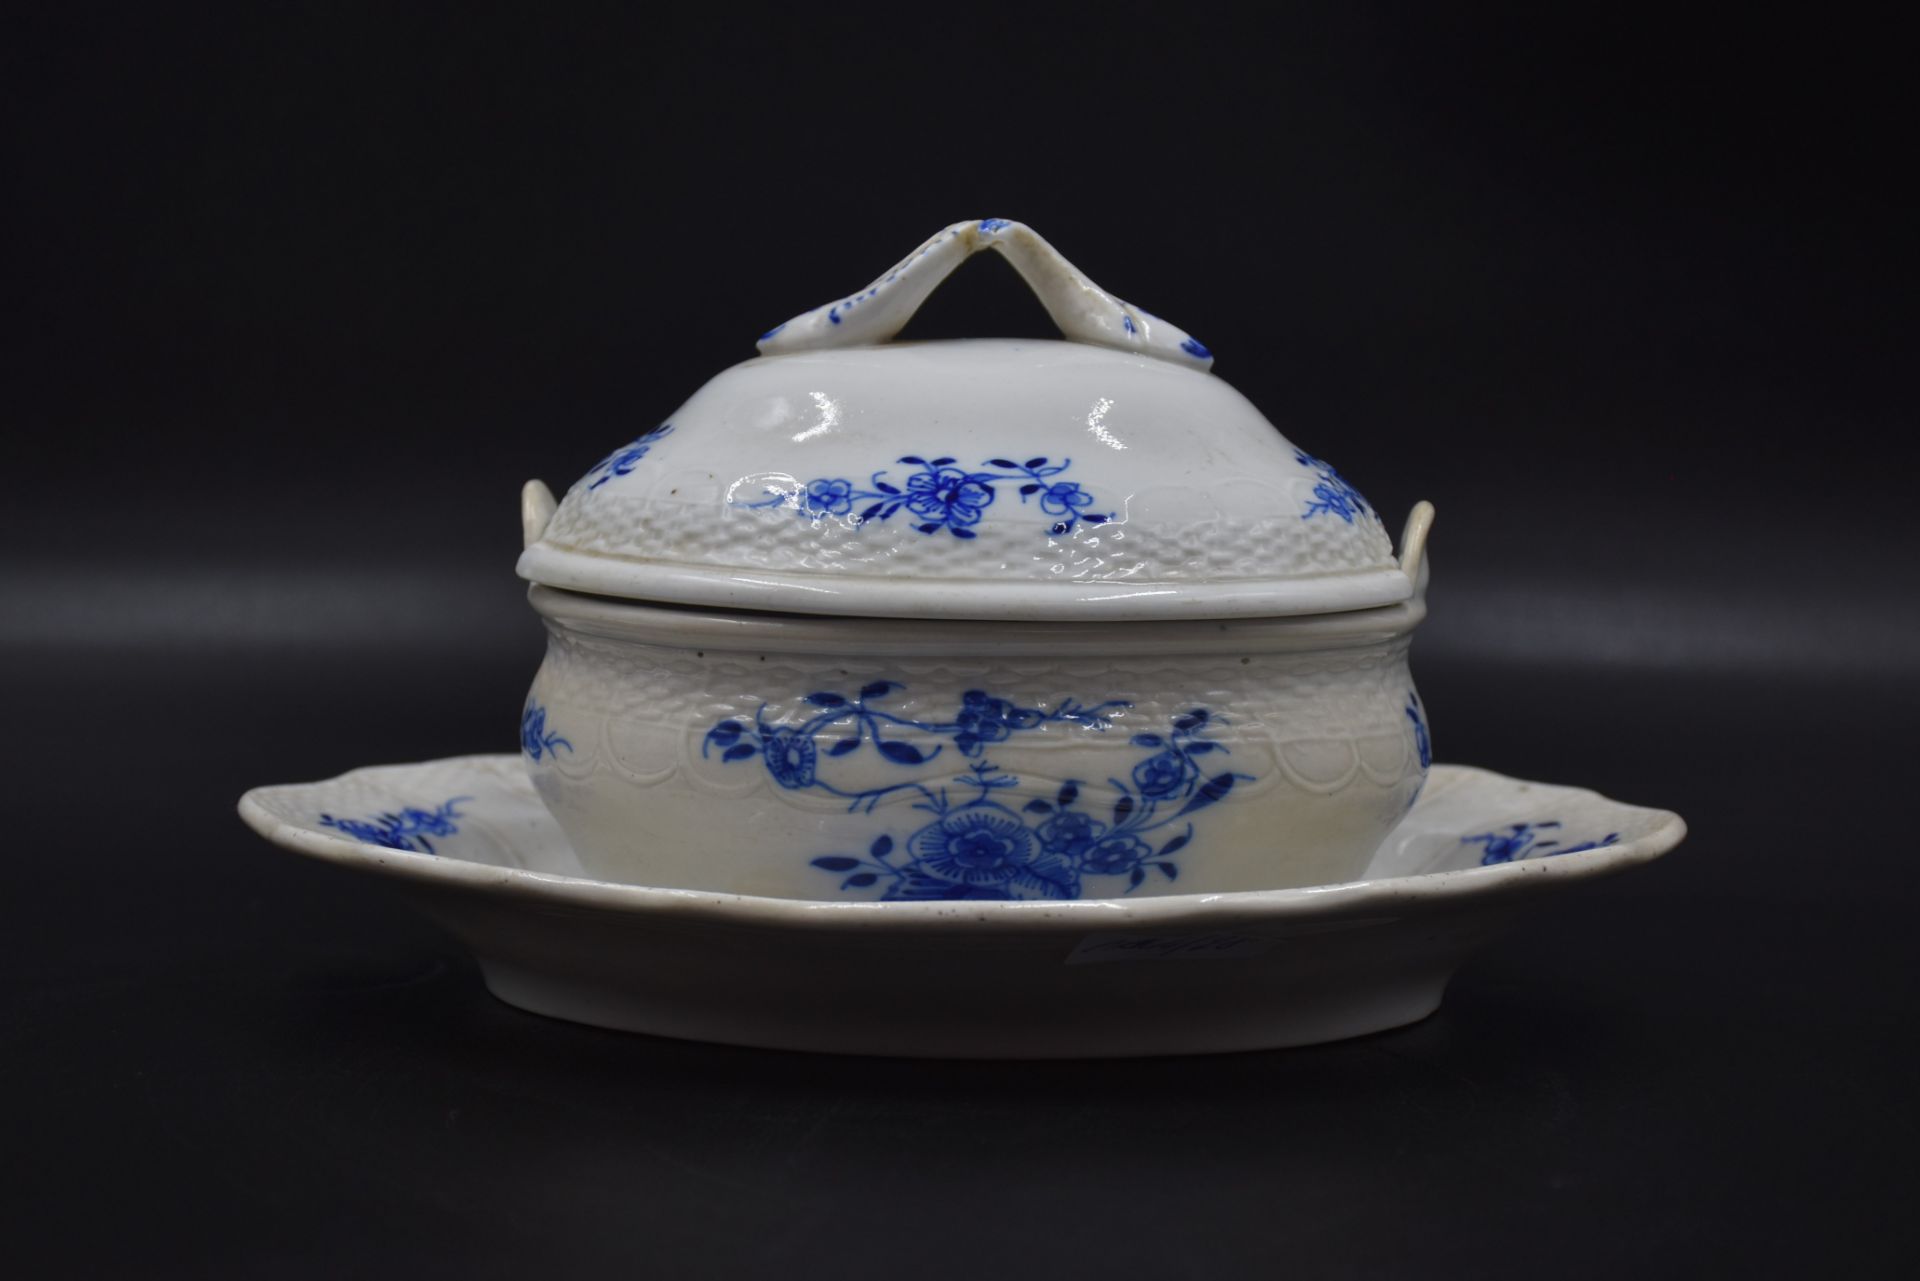 Small covered bowl in porcelain of Tournai with Ronda decoration matched with its tray. Wicker and t - Image 2 of 5